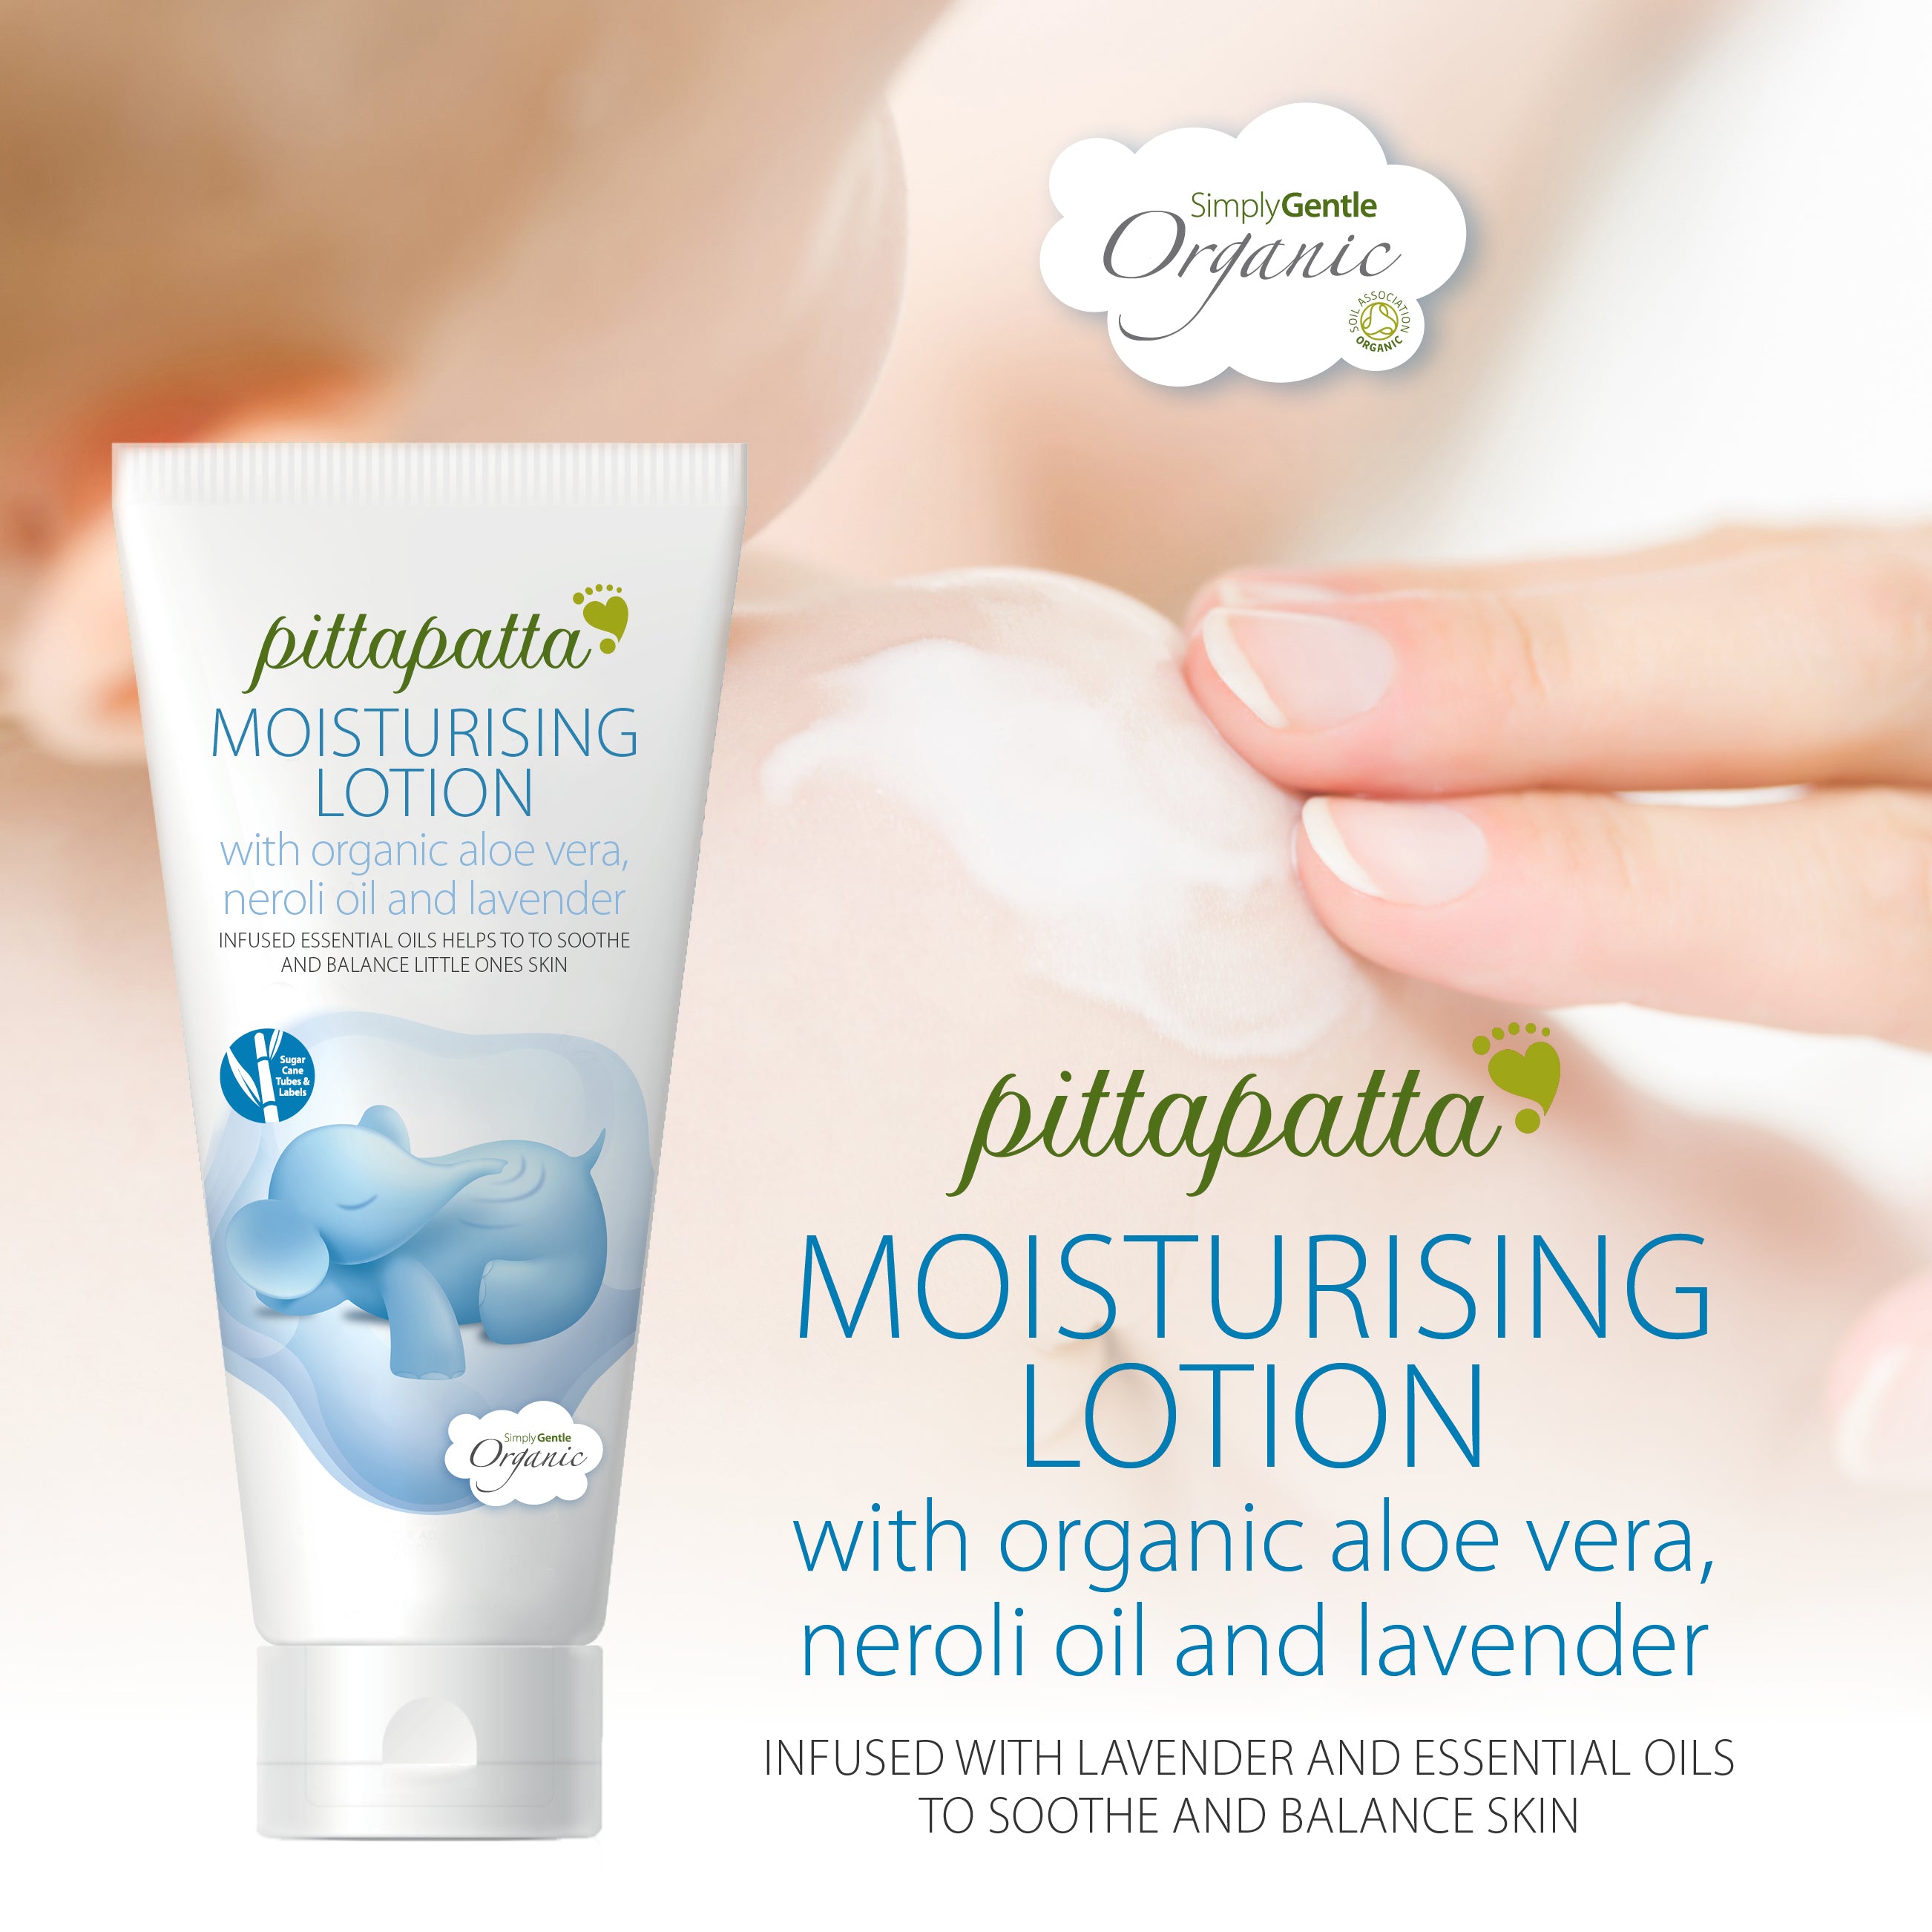 Pittapatta Moisturising Lotion with organic aloe vera, neroli oil and lavender is made with a balanced blend of organic theoboma cacao seed butter to carefully moisturise delicate skin. It is infused with organic lavender and aloe vera extract to soothe and balance little ones who are irritable or restless.